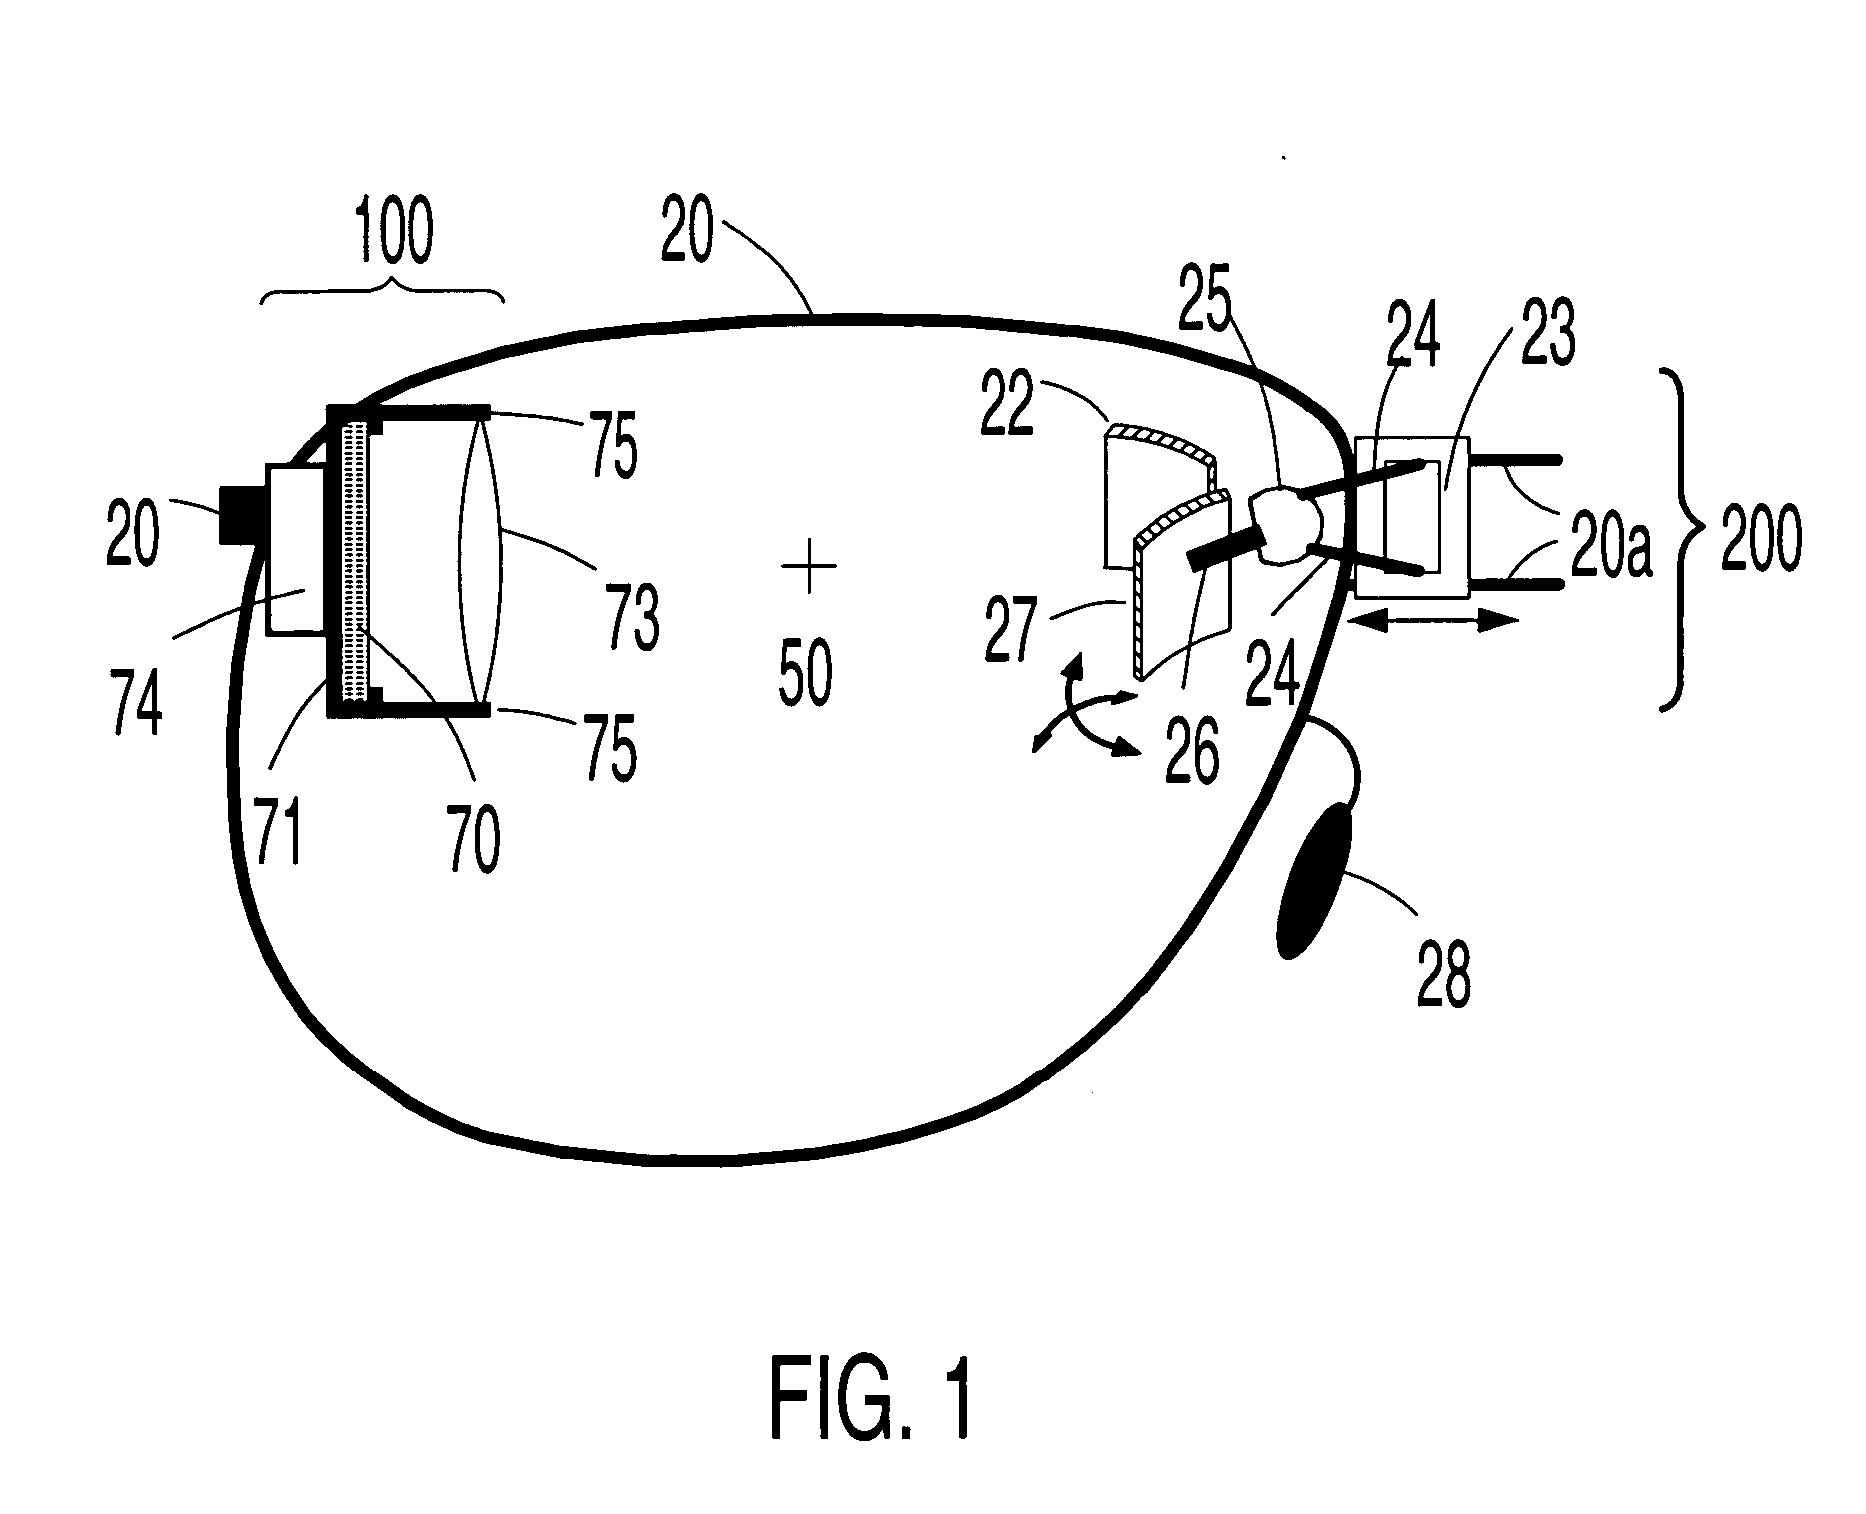 Head-mounted virtual display apparatus for mobile activities